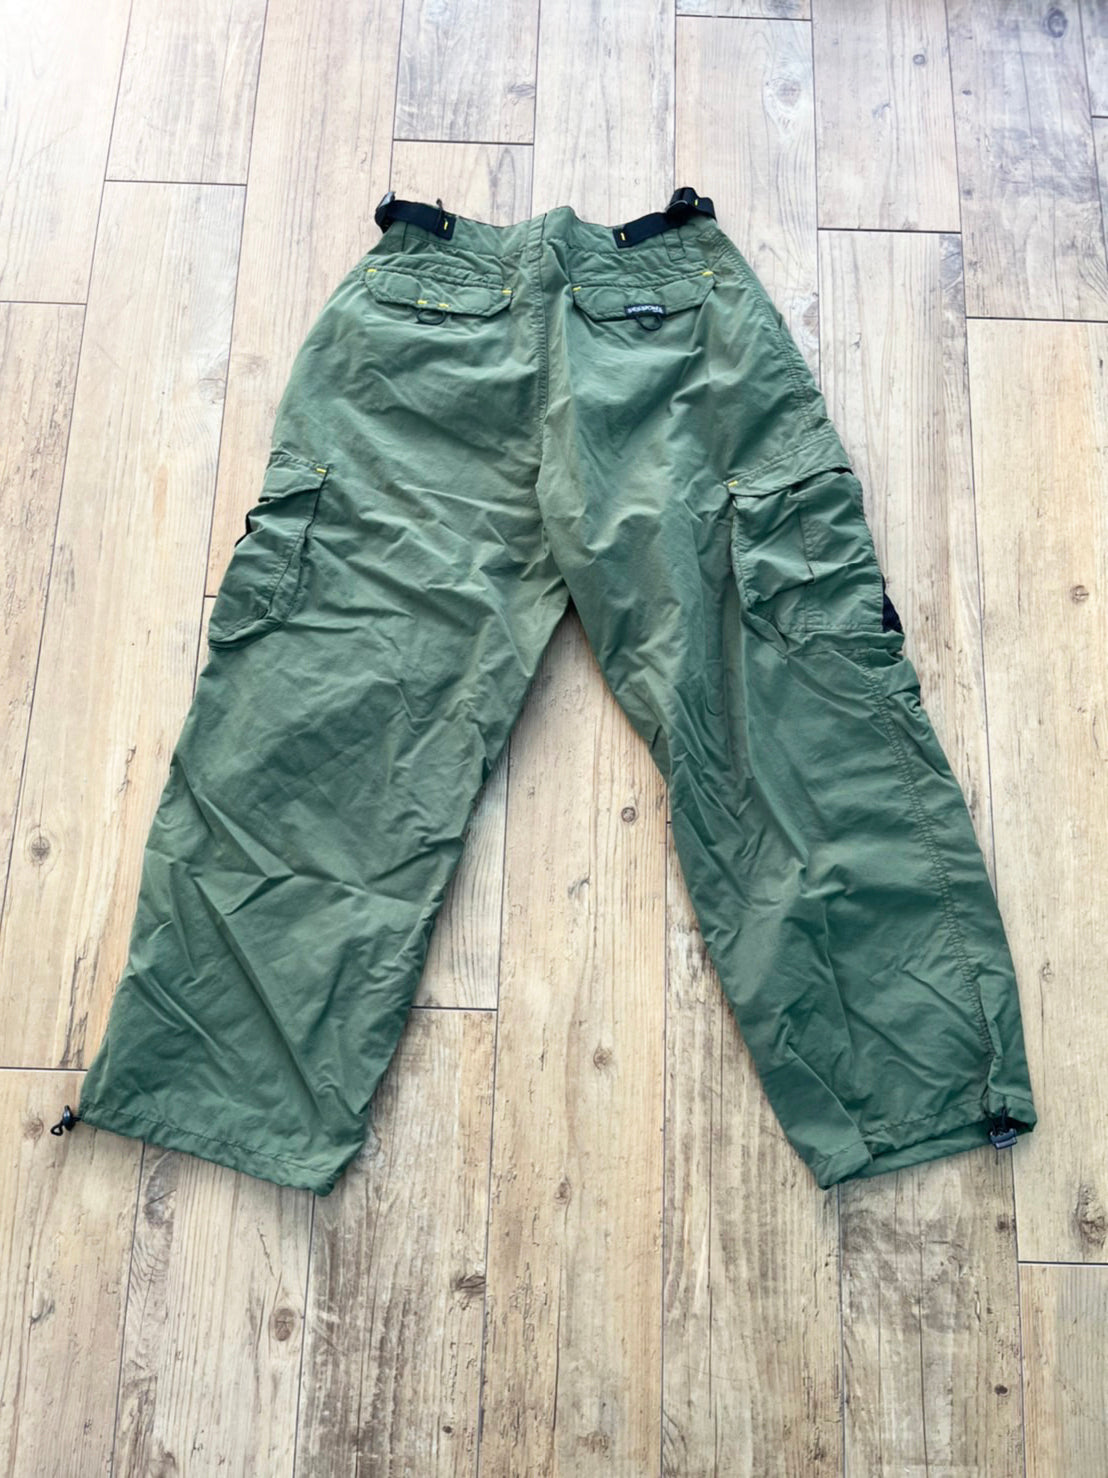 【Dead Stock】 90's sessions surf skate cargo pants (size:30inch)